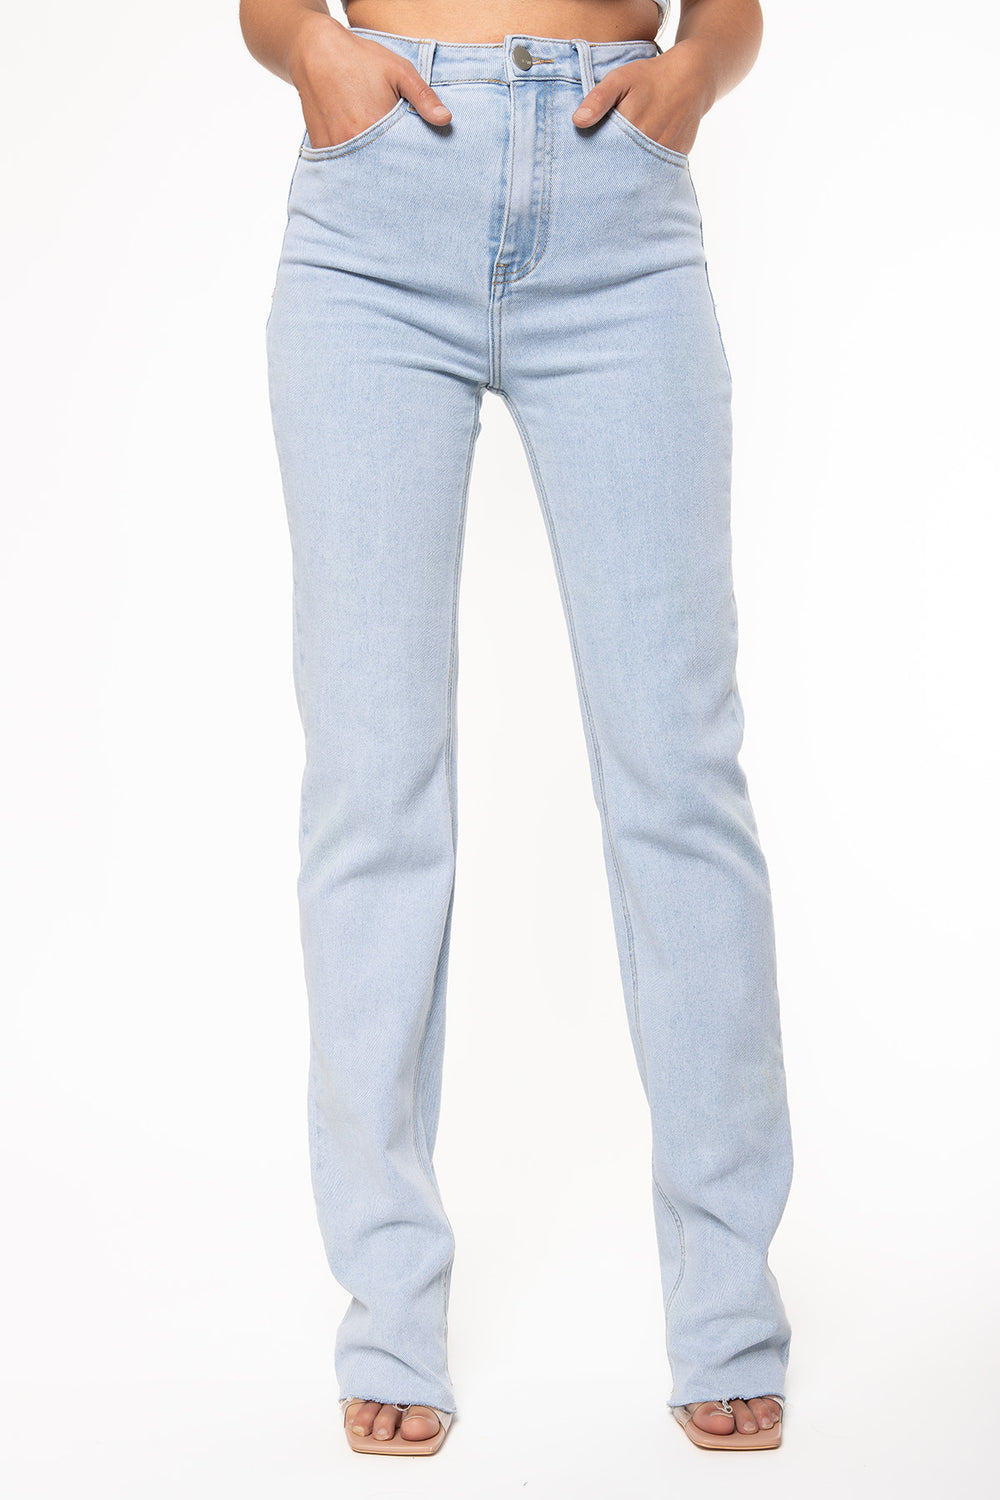 Bella Stretch Straight Leg Jeans - EXTRA TALL Jeans Routines Fashion   